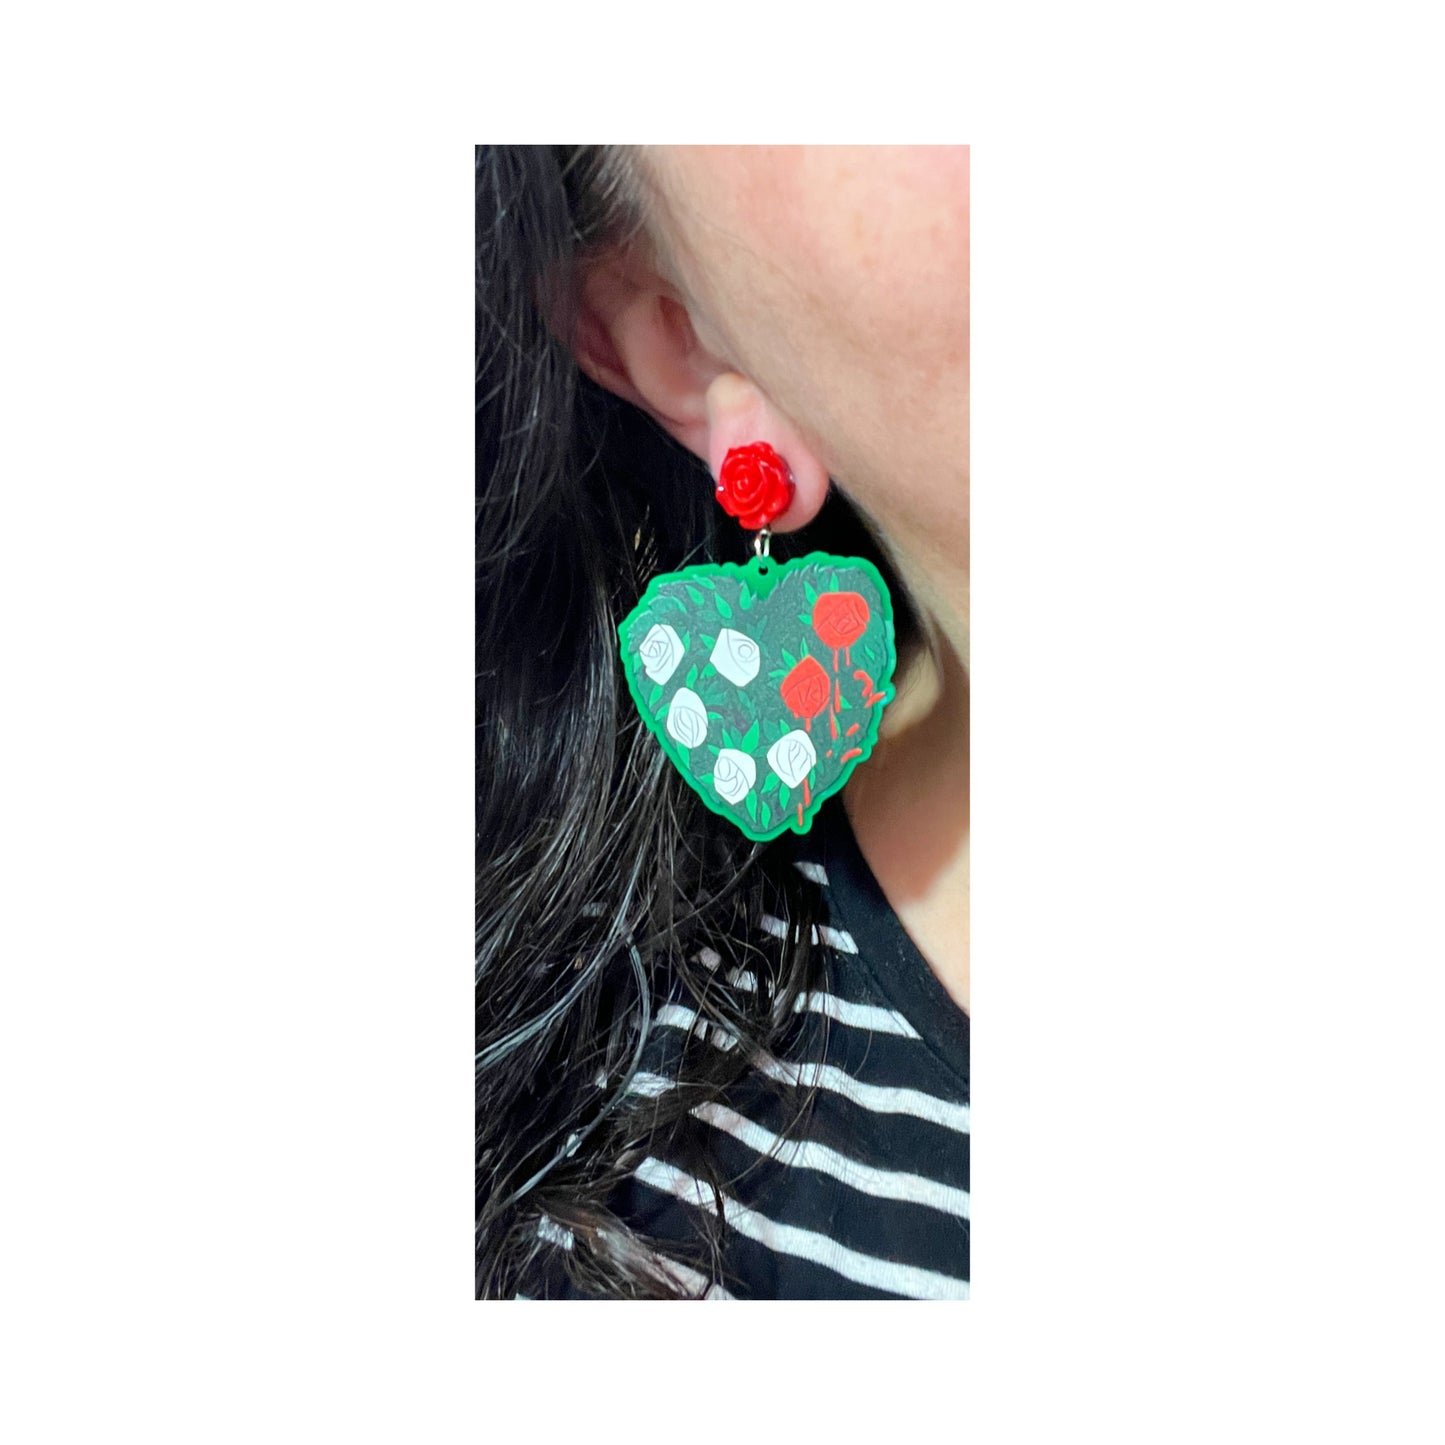 Paint The Roses Red Drop Earrings